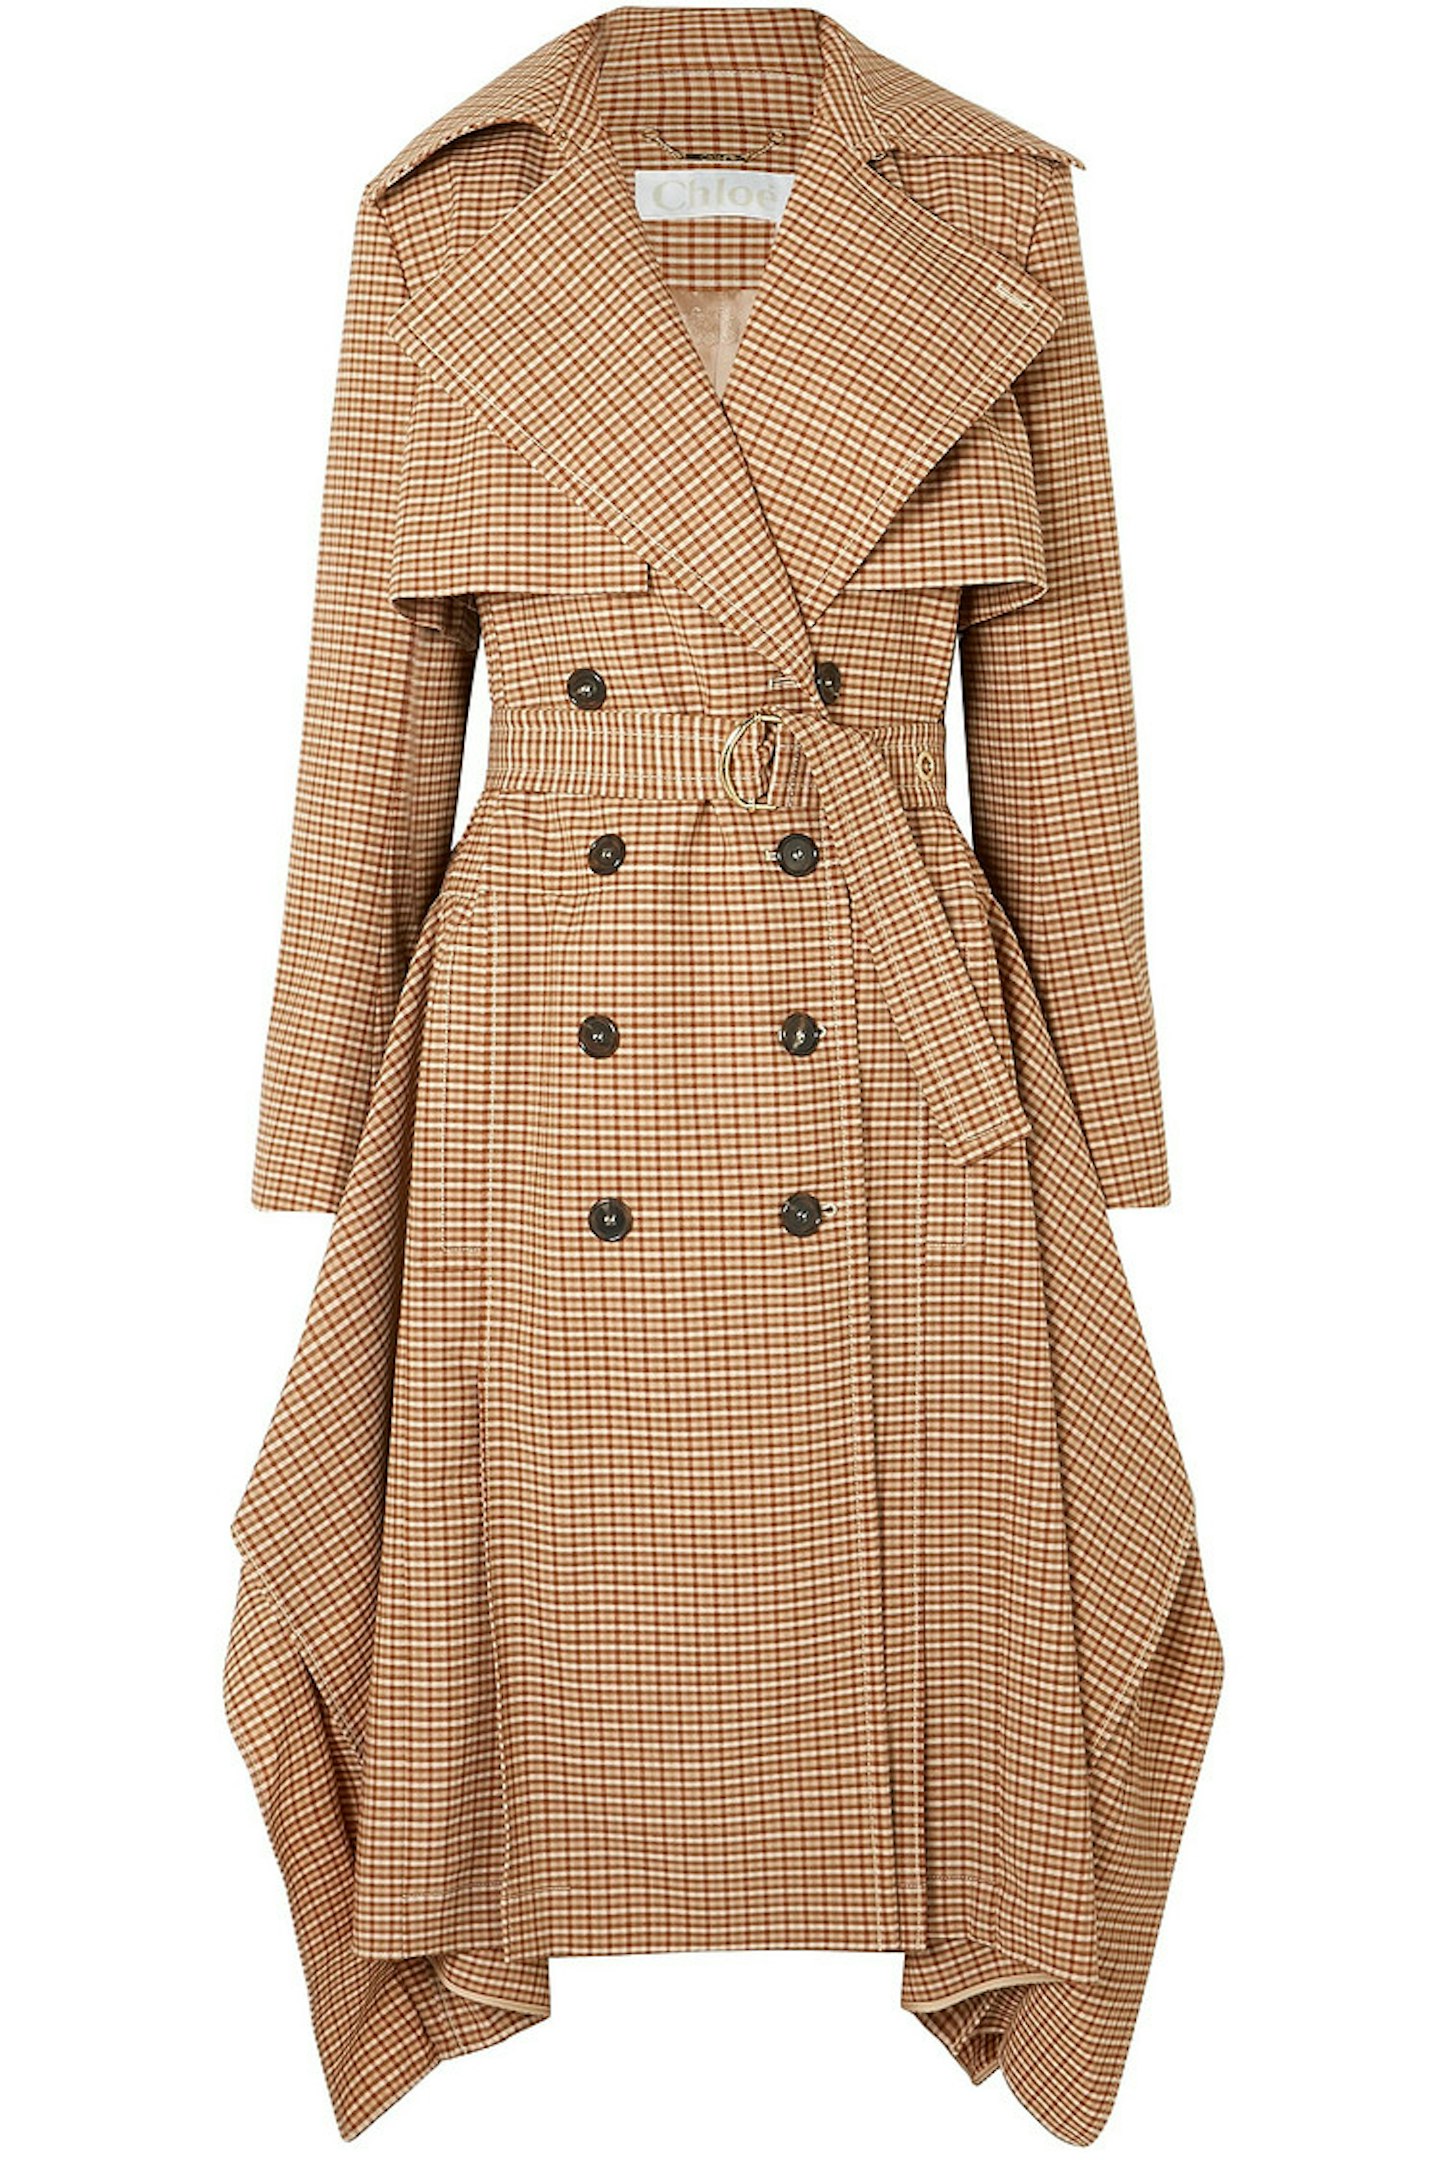 Chlou00e9, Draped checked woven trench coat, WAS £1995, NOW £319